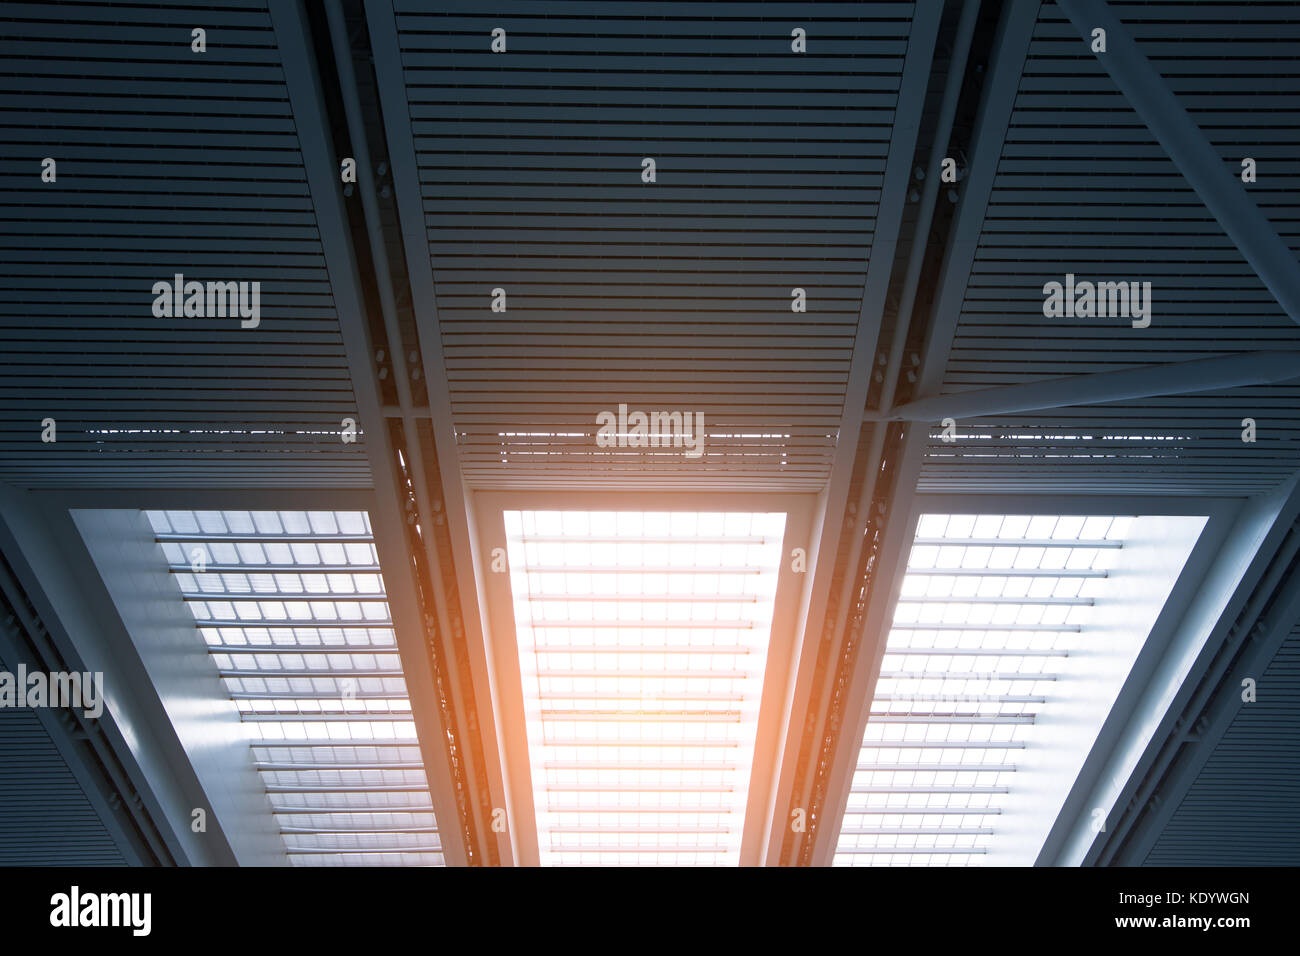 Skylight window - abstract architectural background Stock Photo